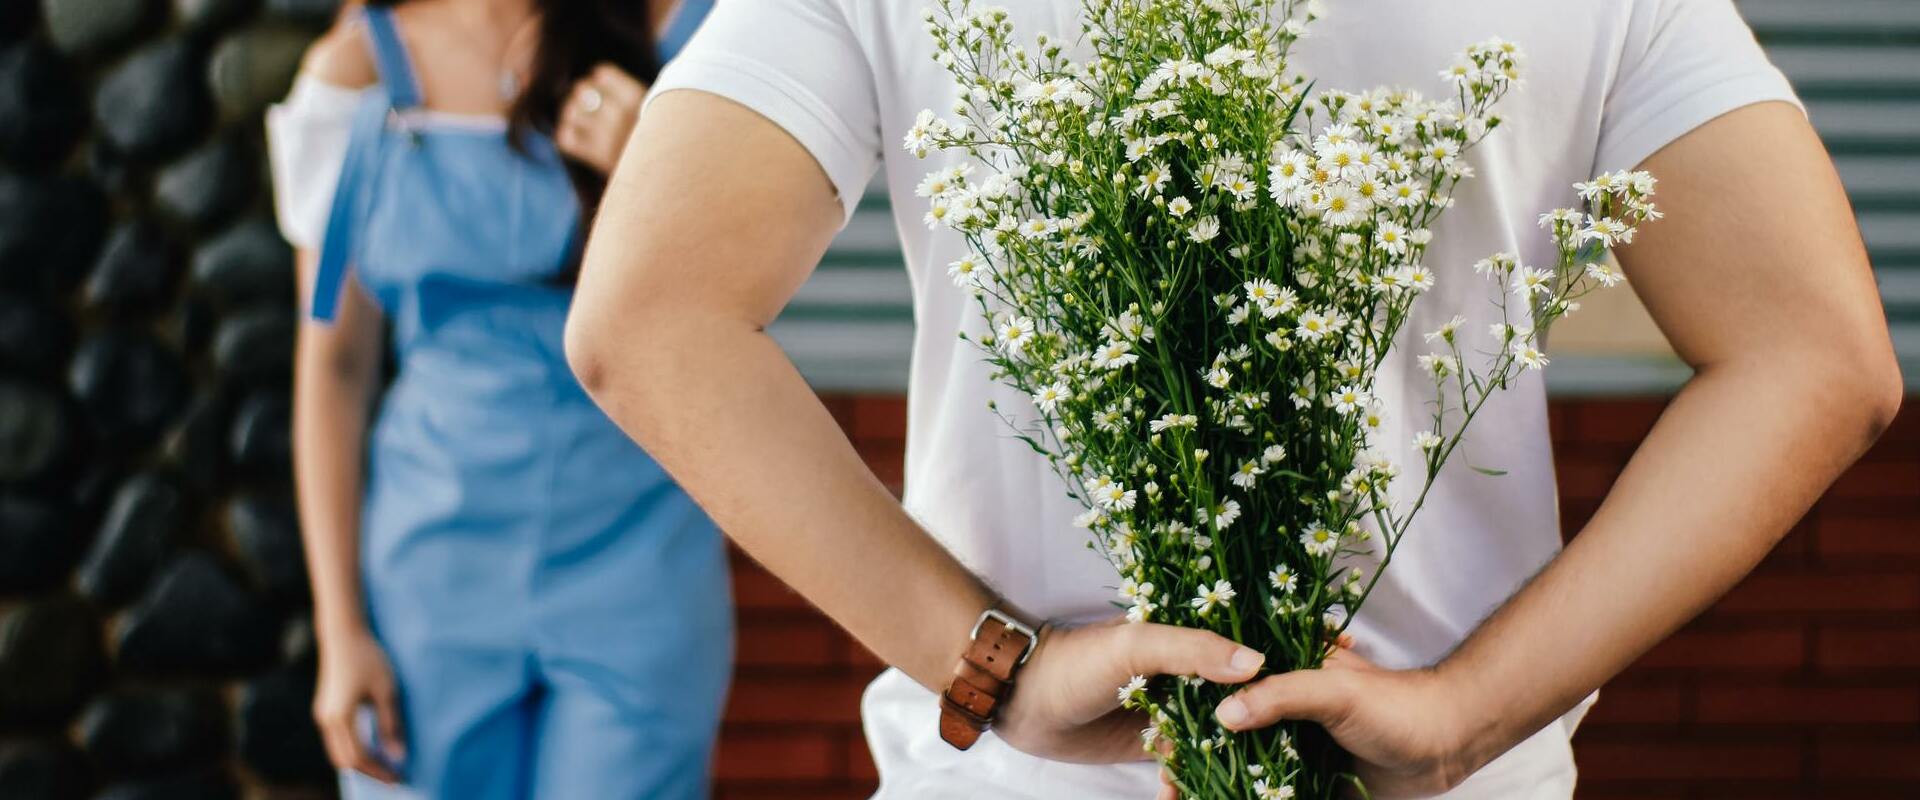 Man holding beautiful flowers behind his back, about to surprise a girl.